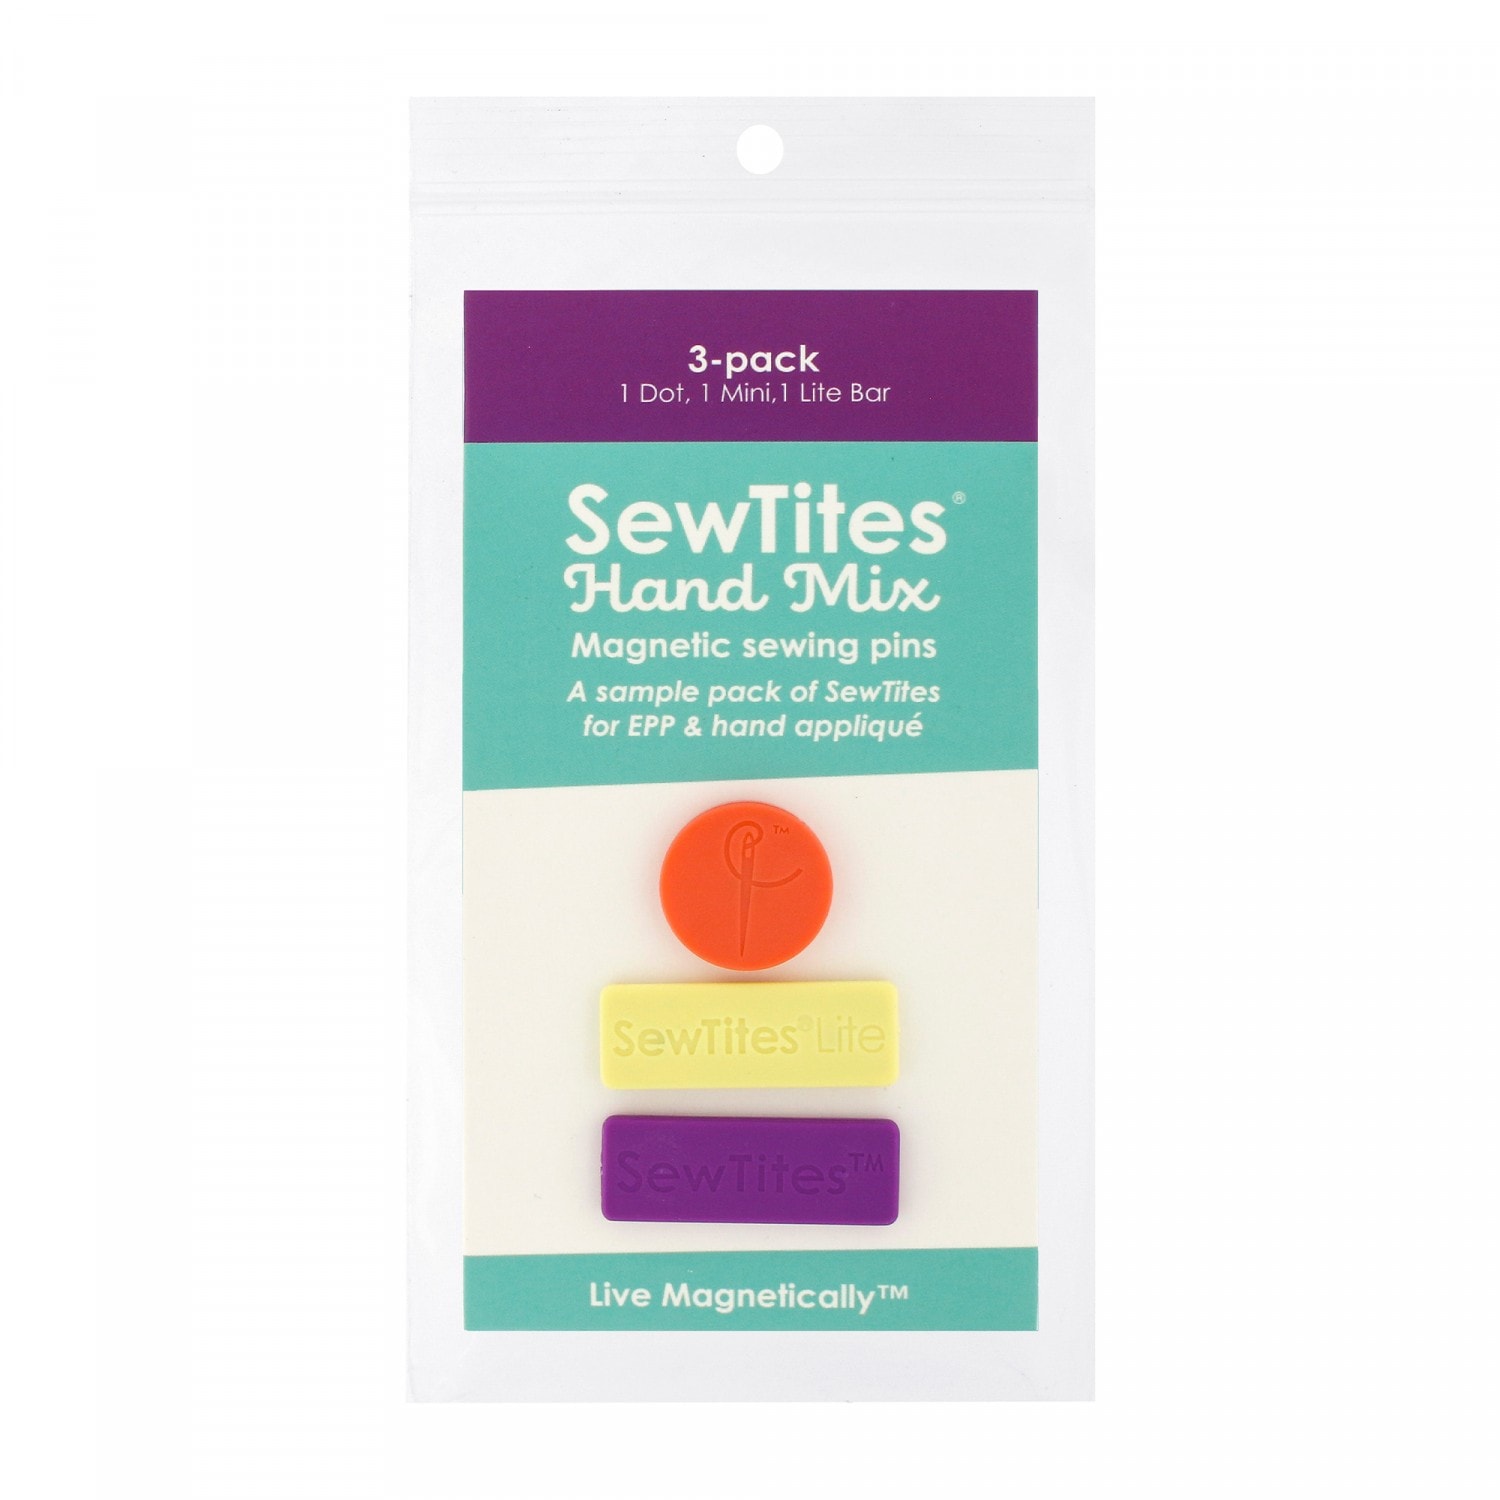 SewTites Hand Mix Magnetic Sewing Pins - 3-pack